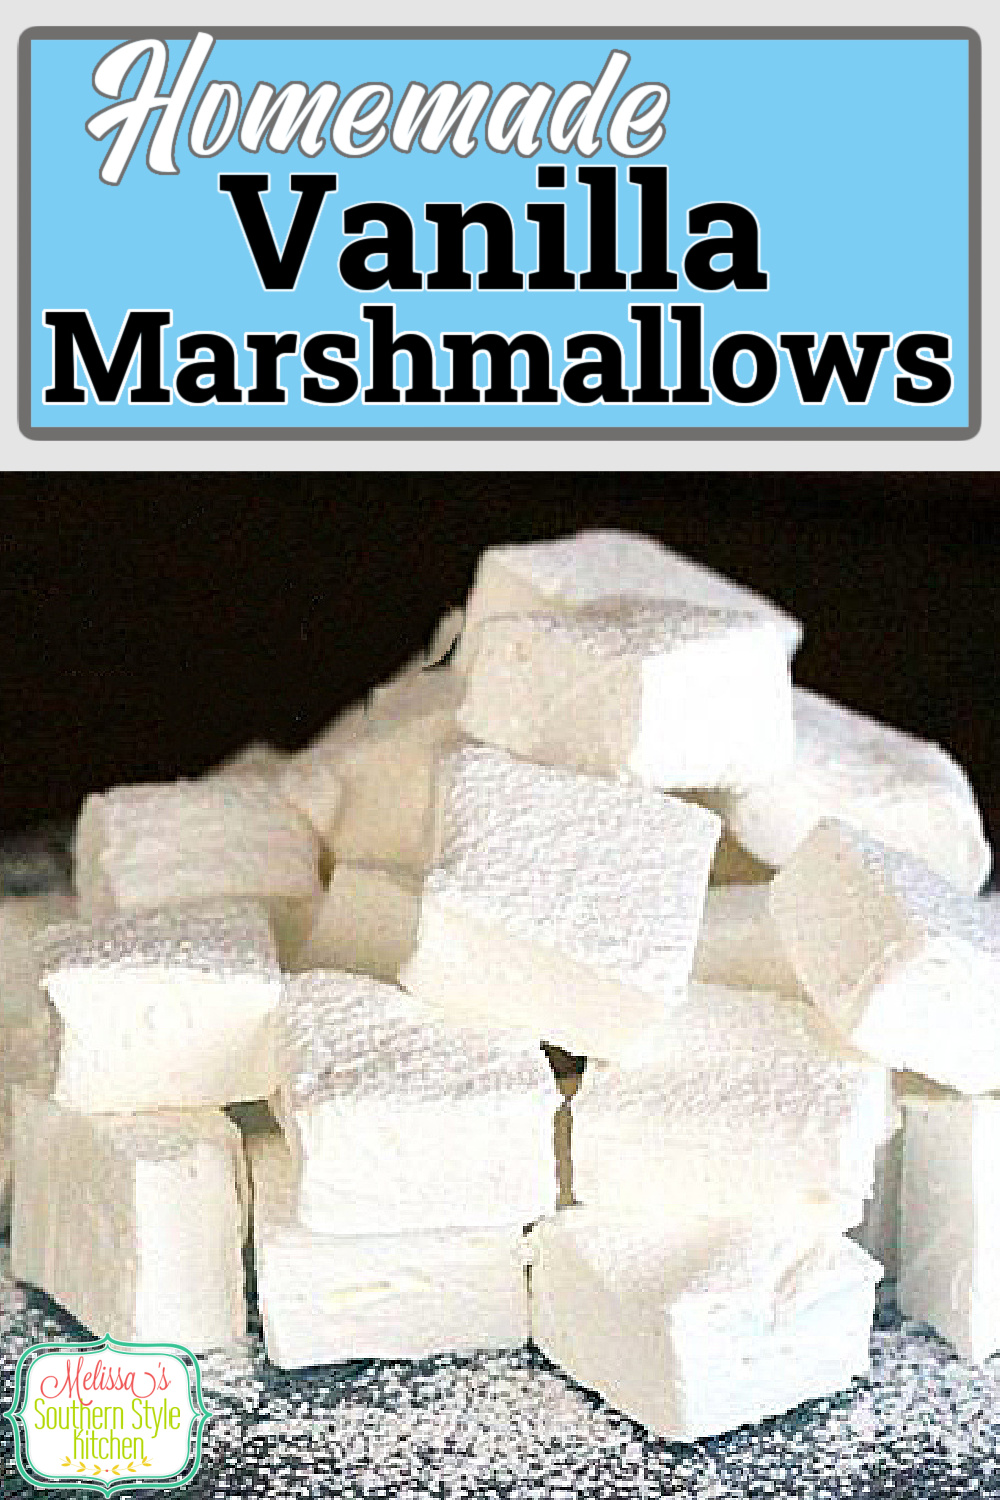 Whip-up a batch of these Homemade Vanilla Marshmallows for dipping in warm chocolate or for topping a cup of steamy hot cocoa #marshamallows #homemademarshmallows #vanilladesserts #sweets #desserts #easyrecipes #southernrecipes #vanillamarshmallows via @melissasssk